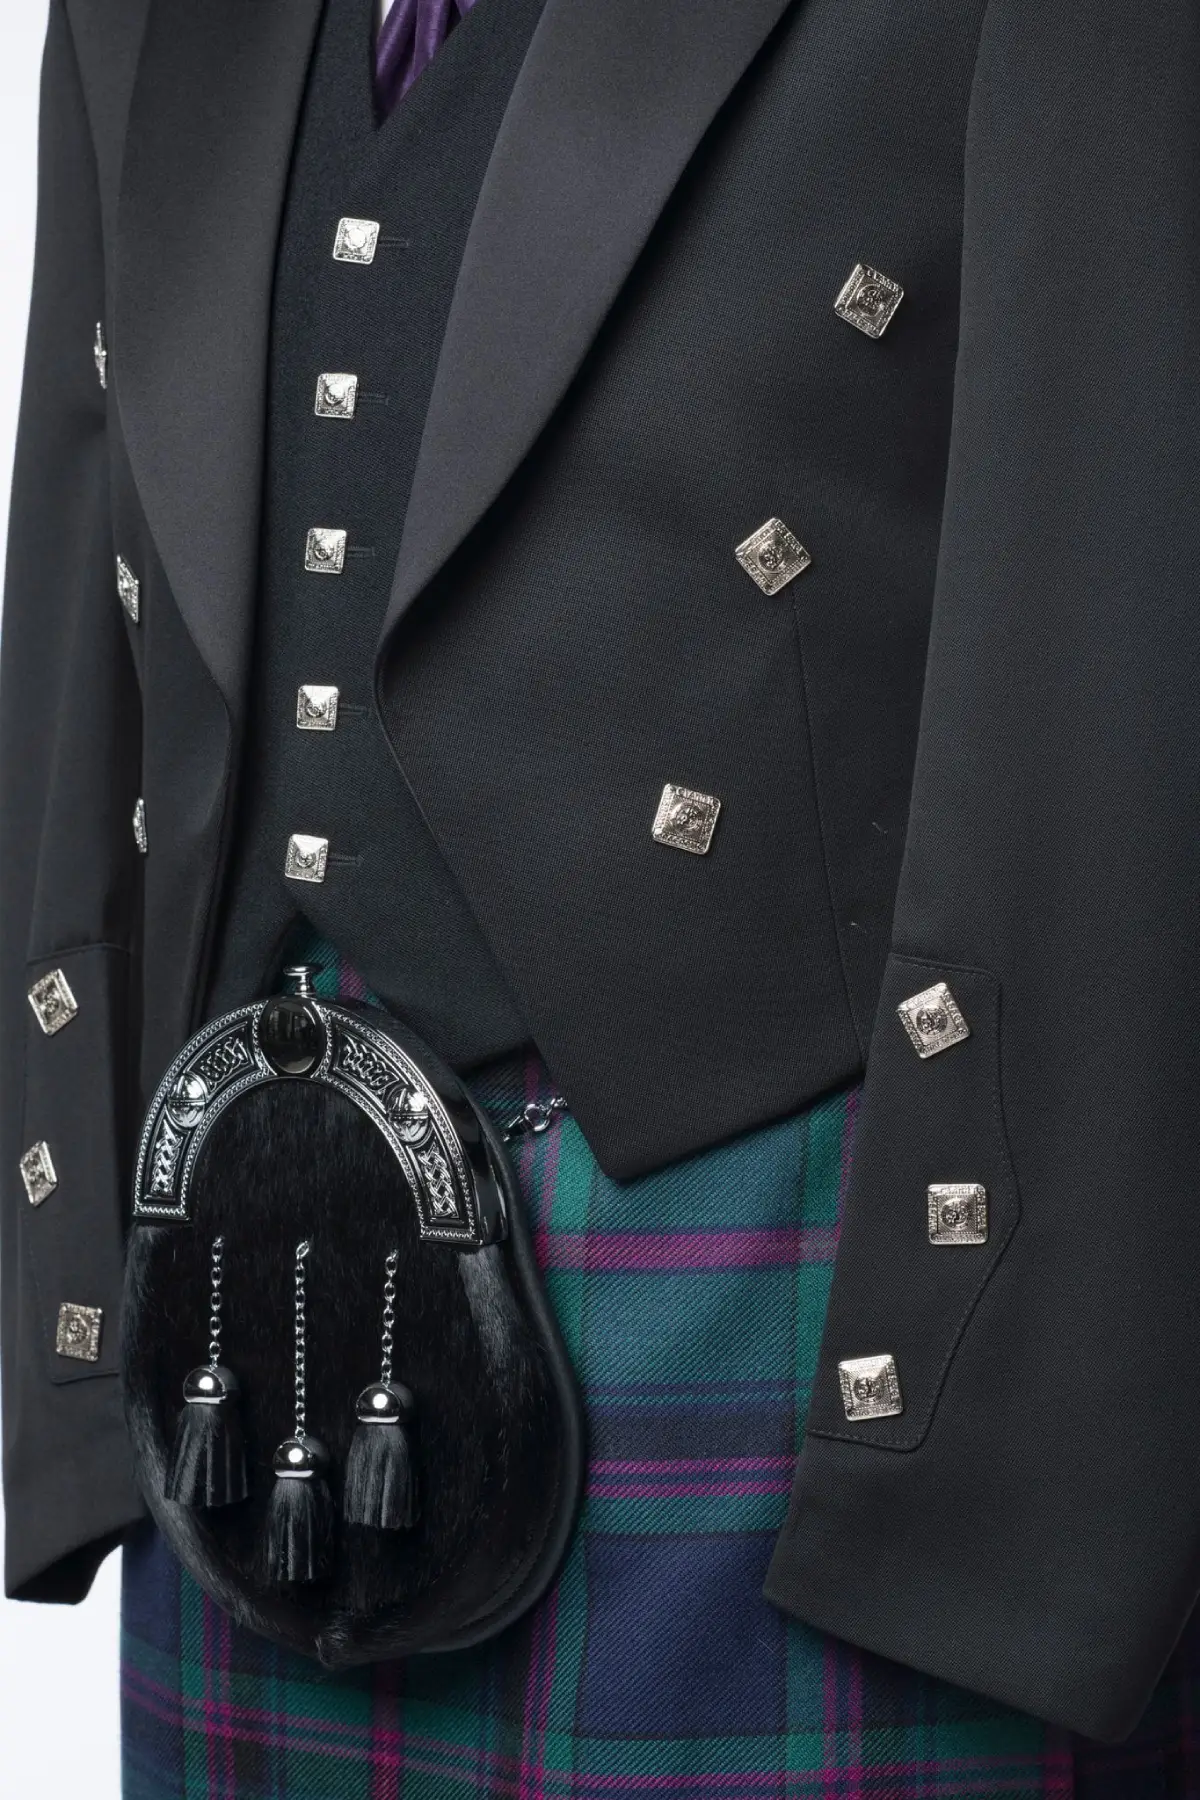 Prince-Charlie-Kilt-Outfit-with-5-button-vest4